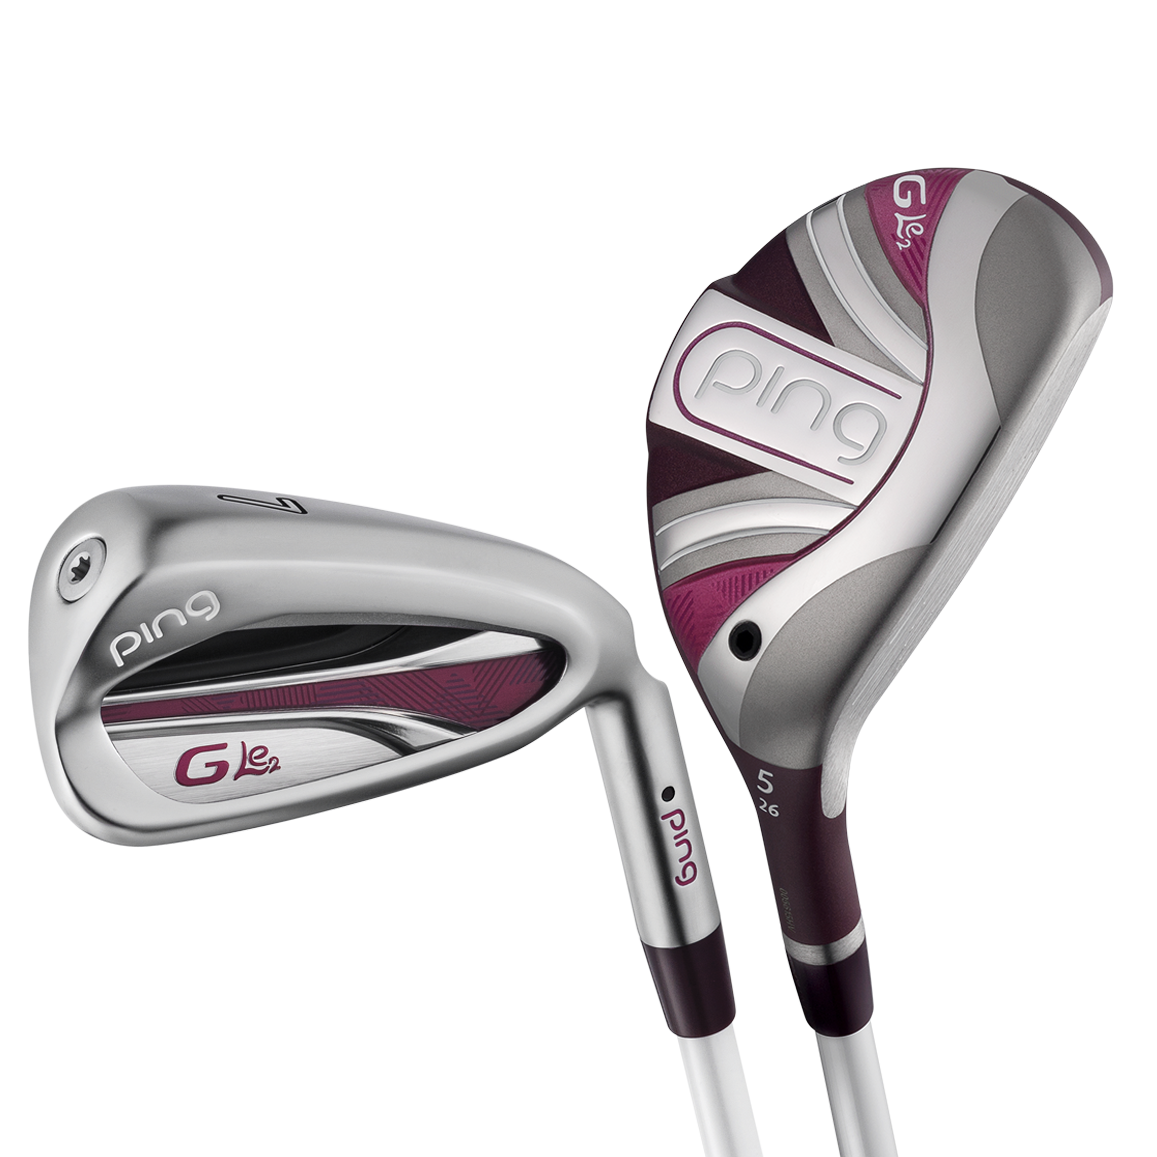 Ping G Le 2 Combo Set, Best Ladies Ping Golf Clubs shown with 2 clubheads in a pretty striped design.